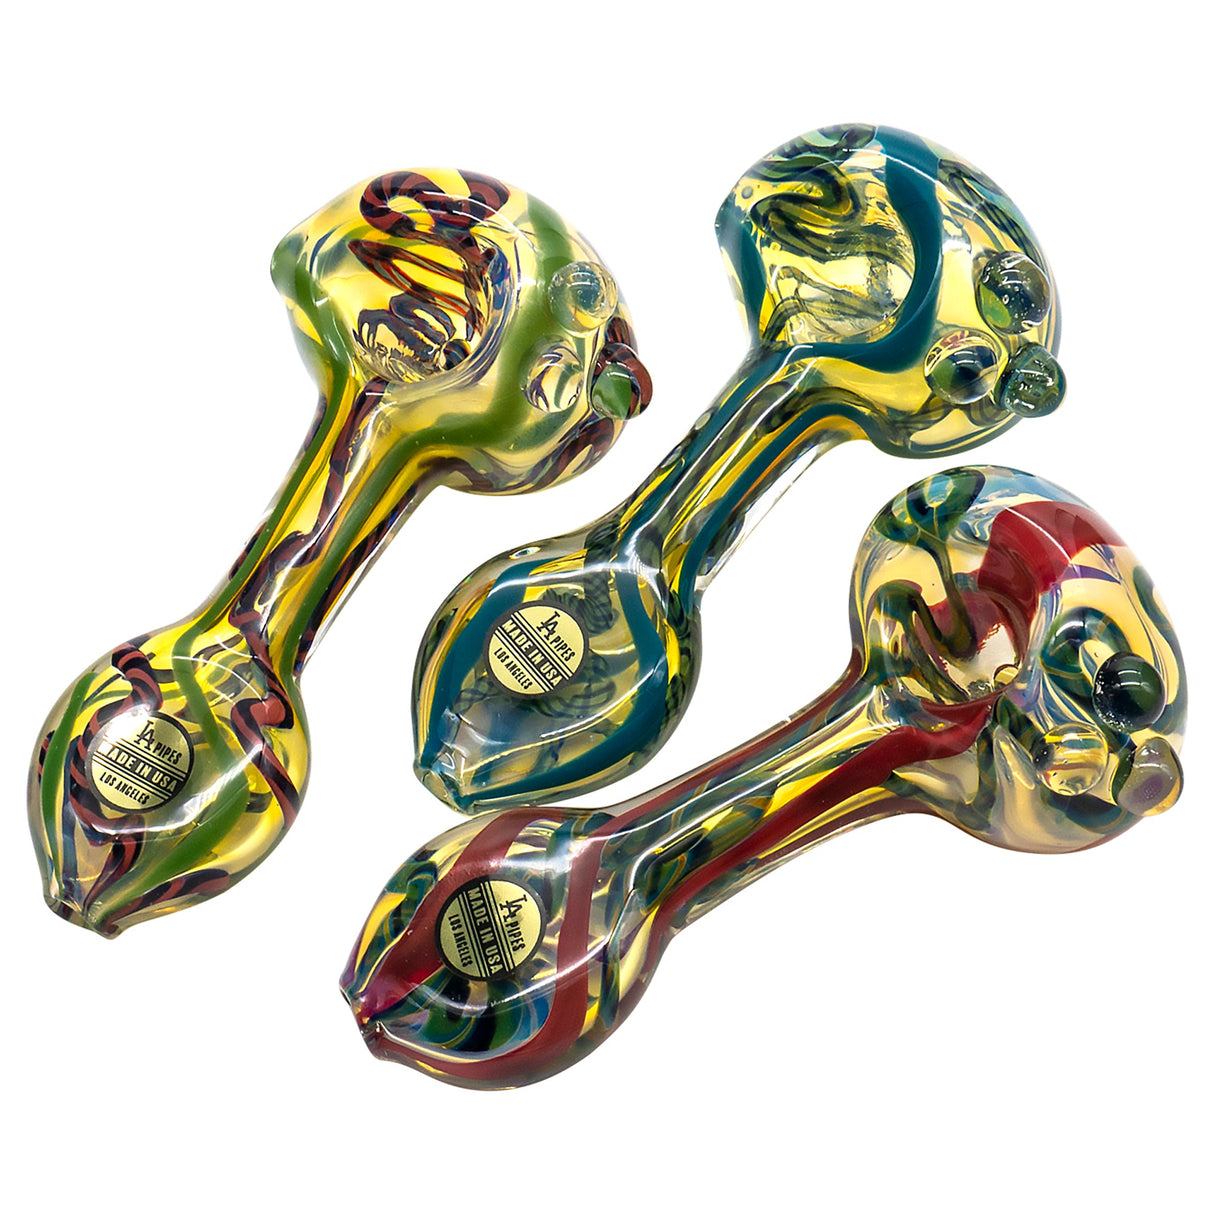 LA Pipes Inside-Out Candy Cane Glass Pipes, Fumed Color Changing, 4" Length